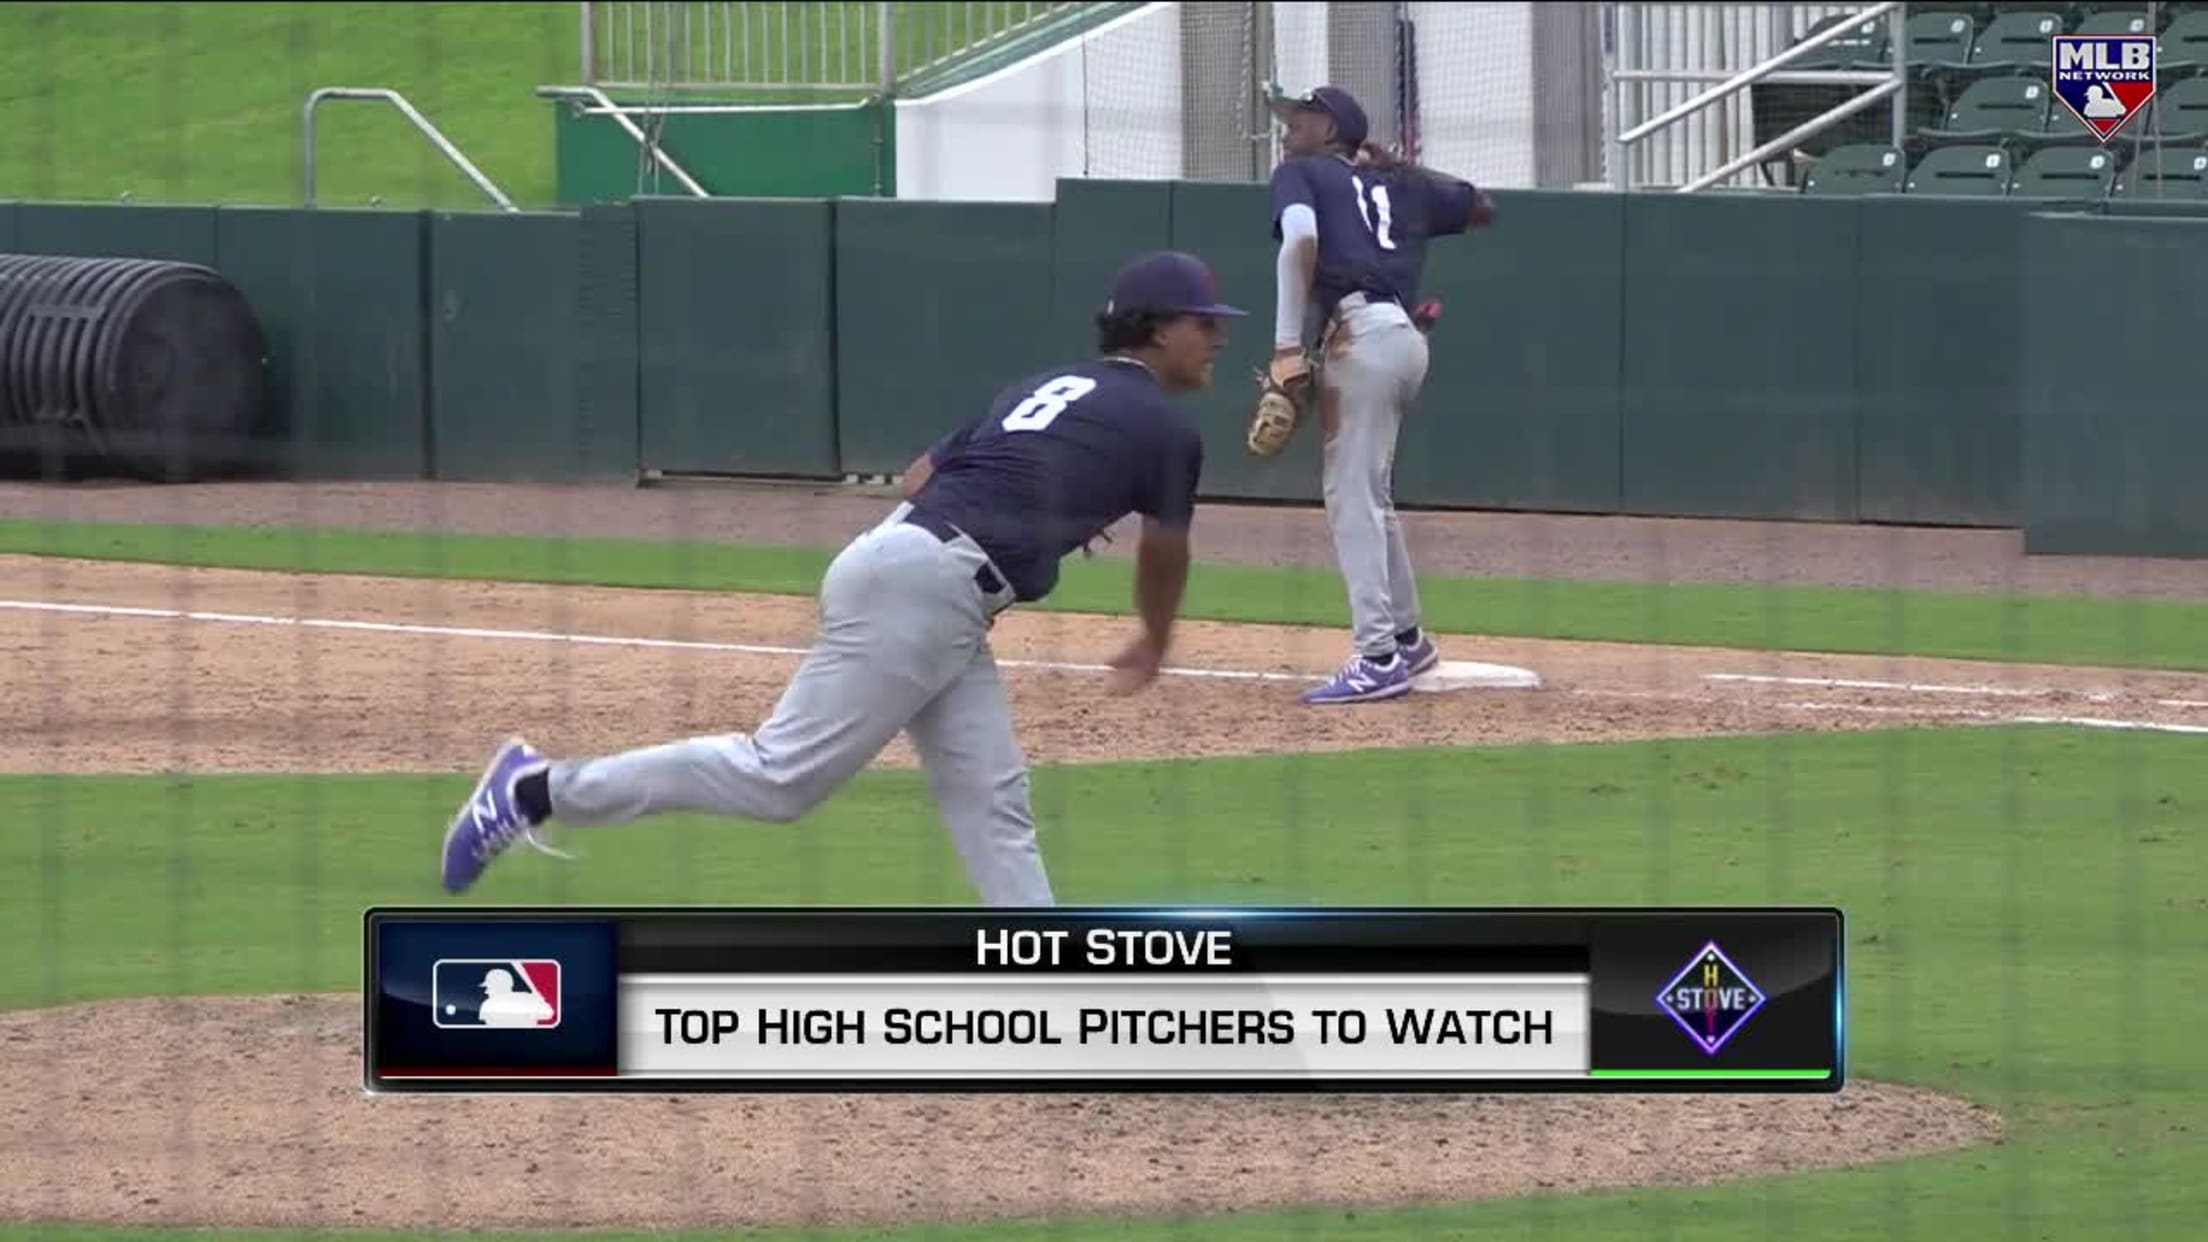 Top high school pitchers to watch